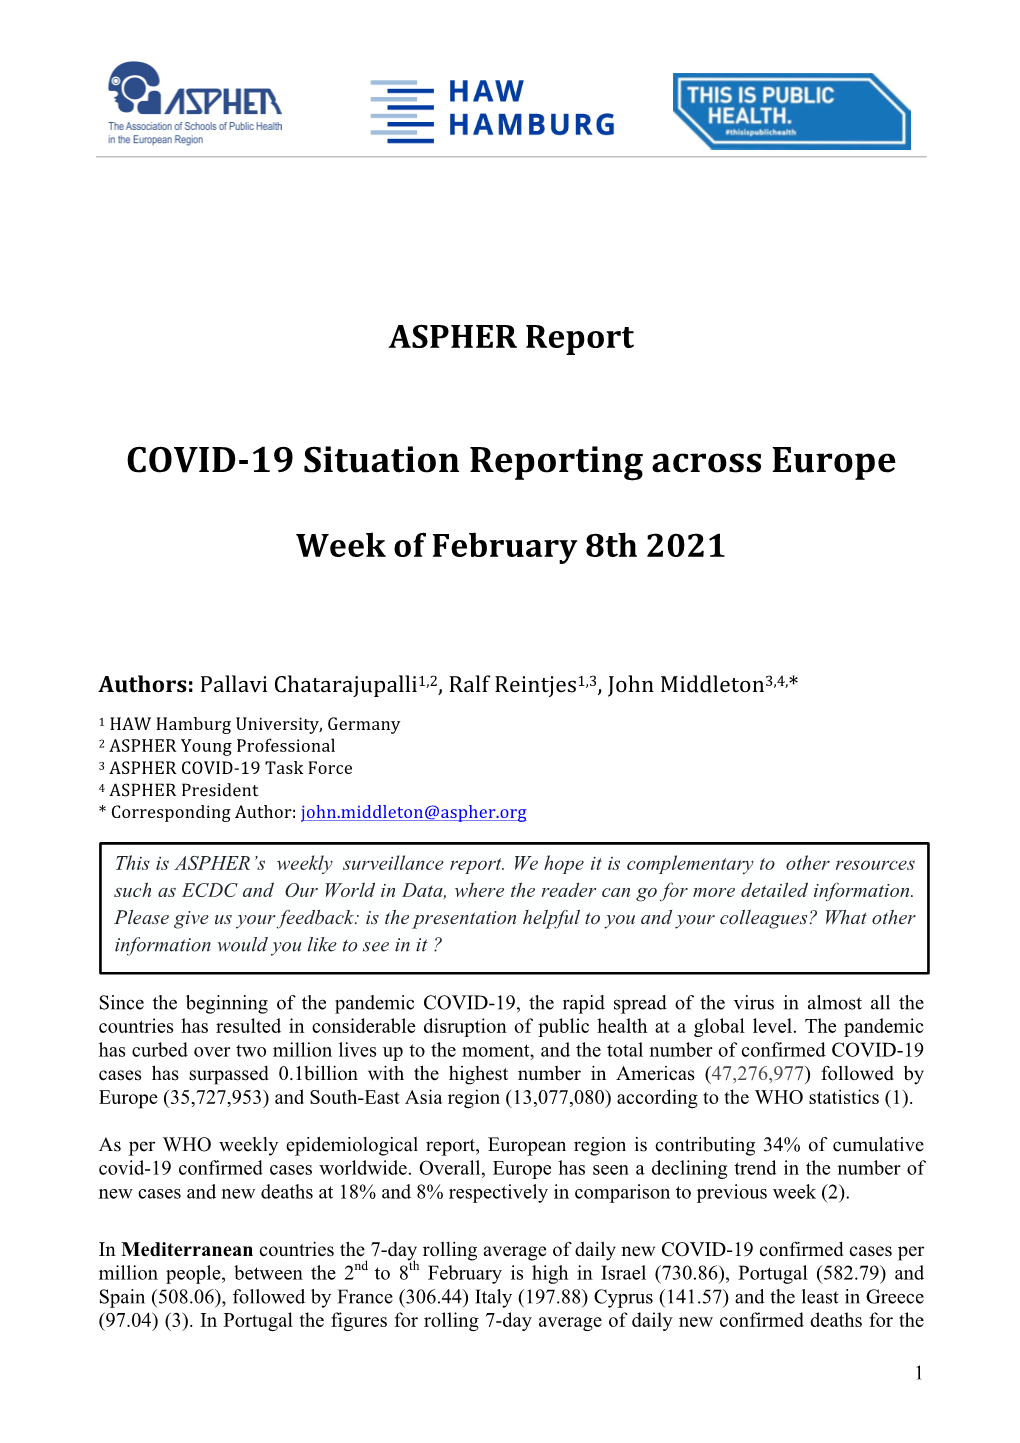 COVID-‐19 Situation Reporting Across Europe